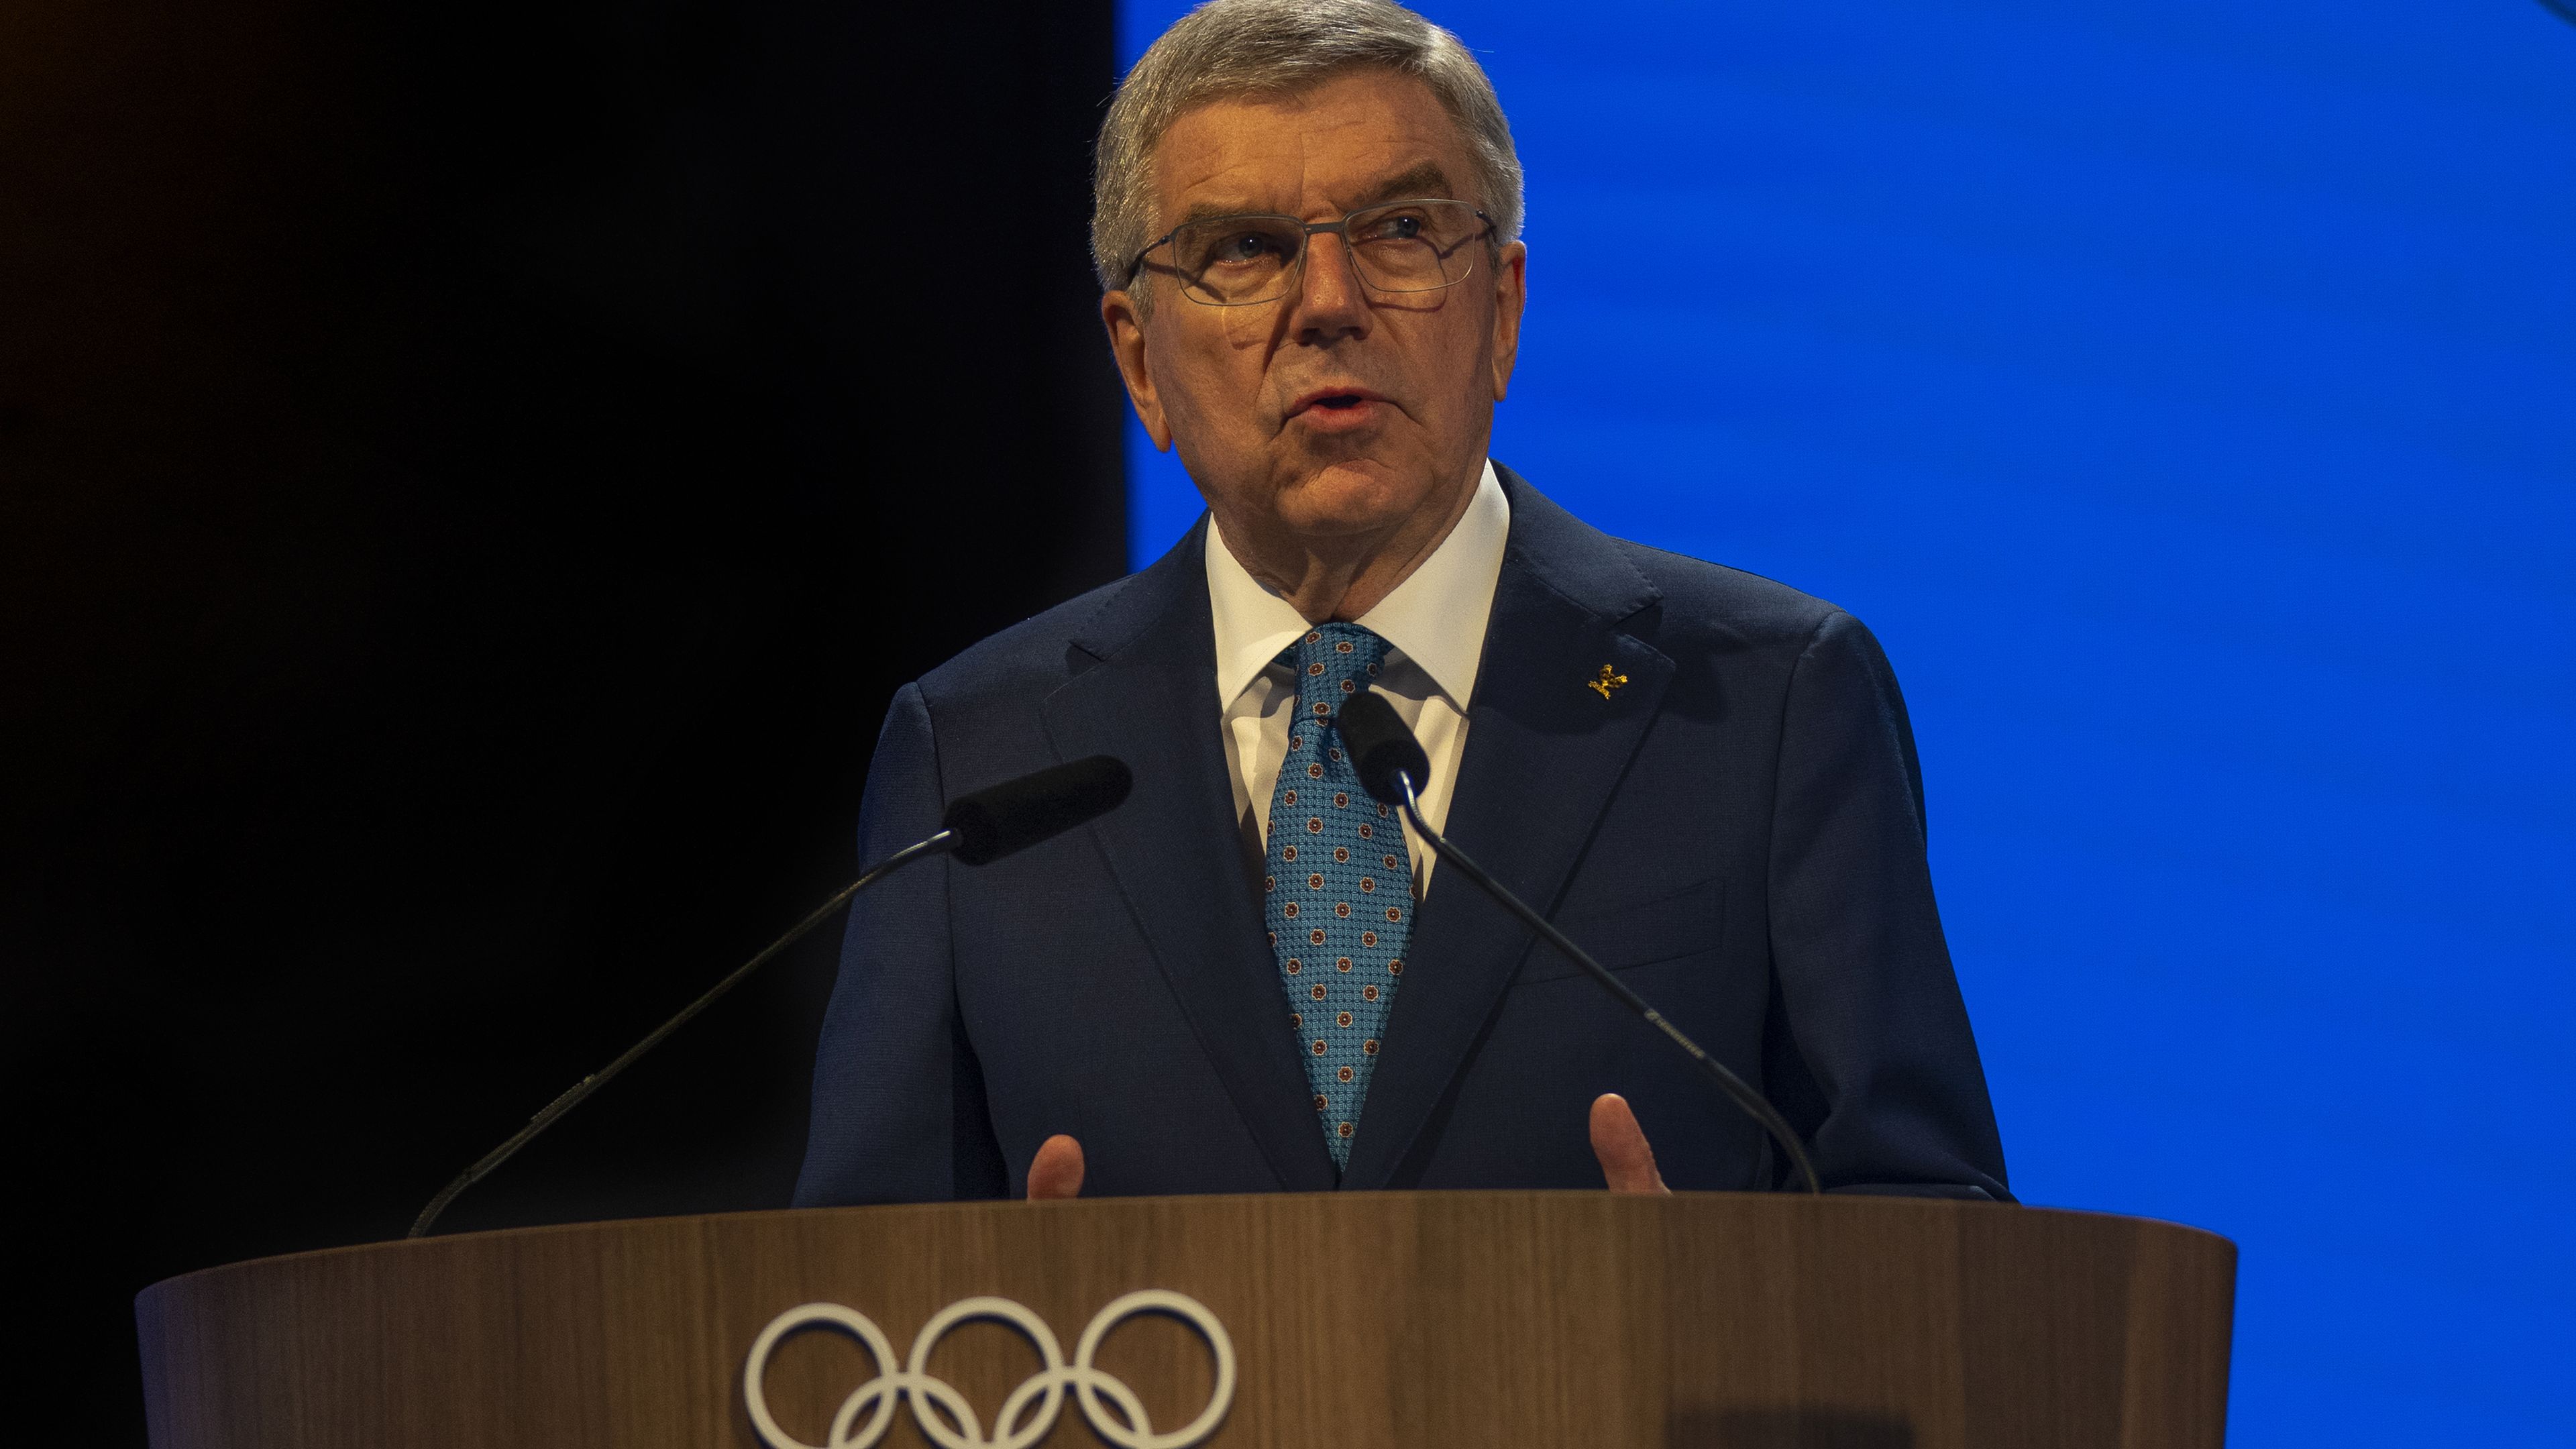 IOC says president was tricked by Russian prank callers amid tension ahead of Paris 2024